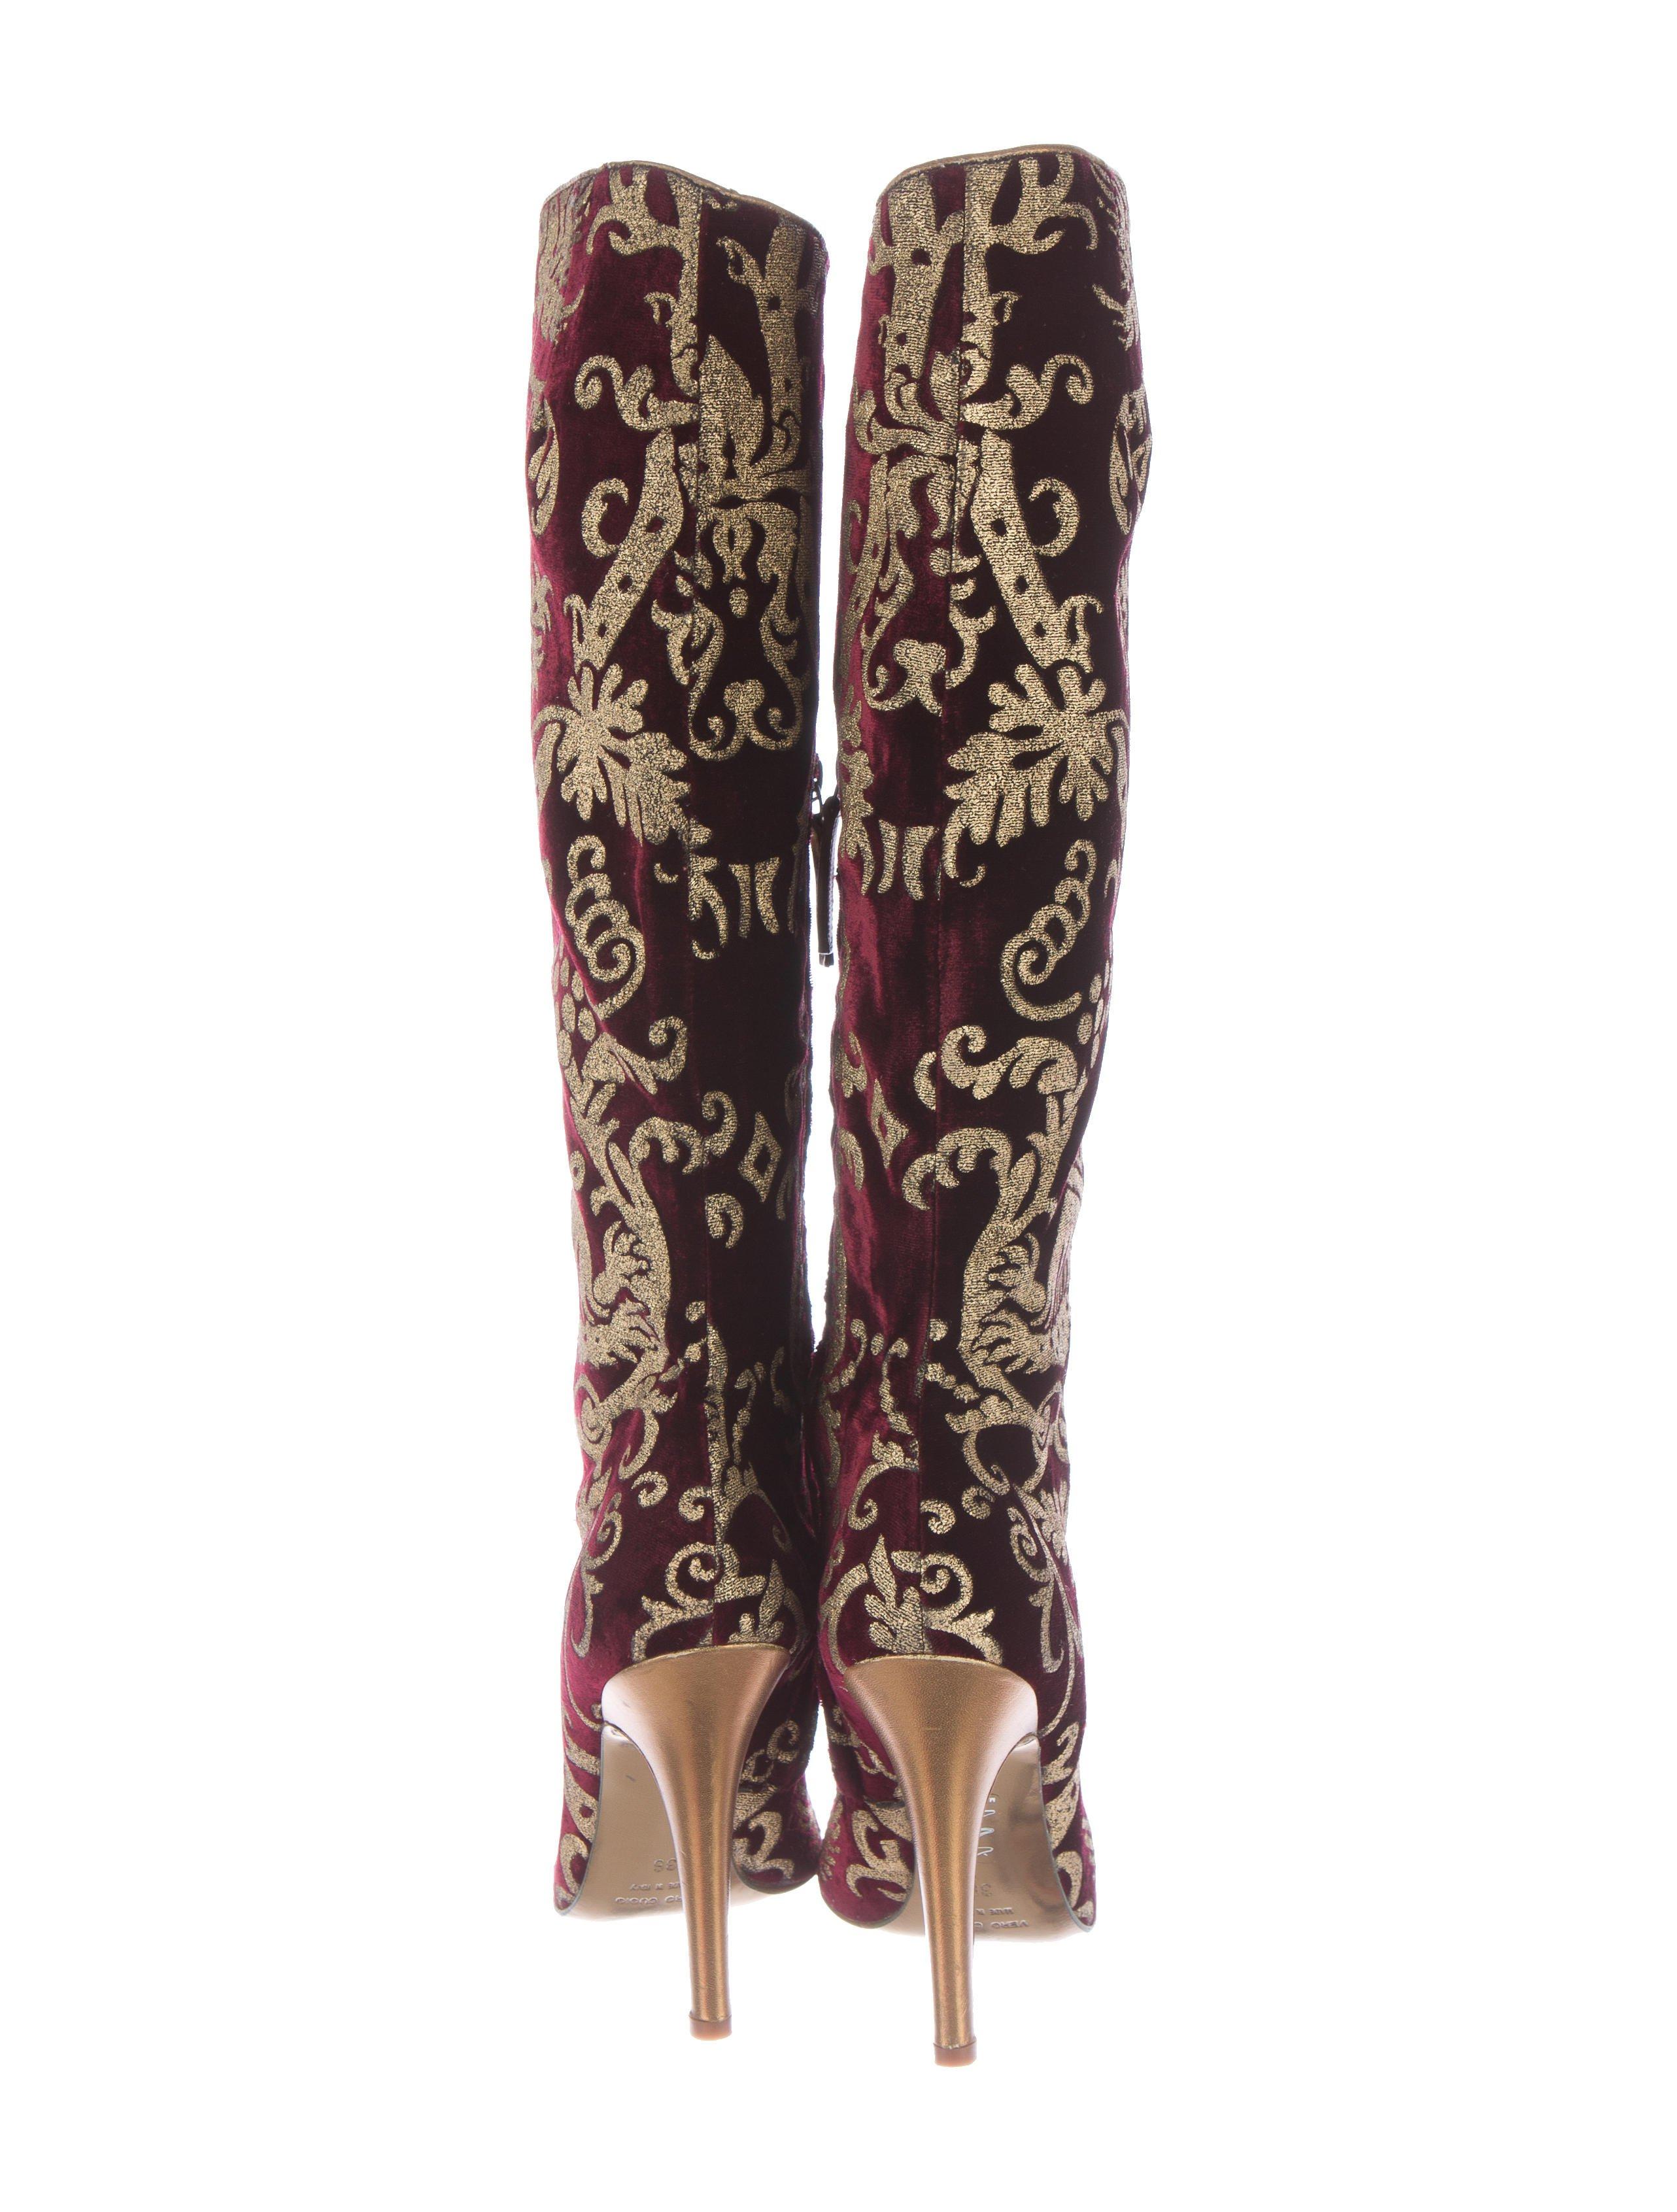 ROBERTO CAVALLI BOOTS

Burgundy and gold-tone metallic brocade Roberto Cavalli round-toe knee-high boots with tonal stitching throughout, gold-tone metallic leather covered heels and zip closure at sides.

Calf Circumference: 13